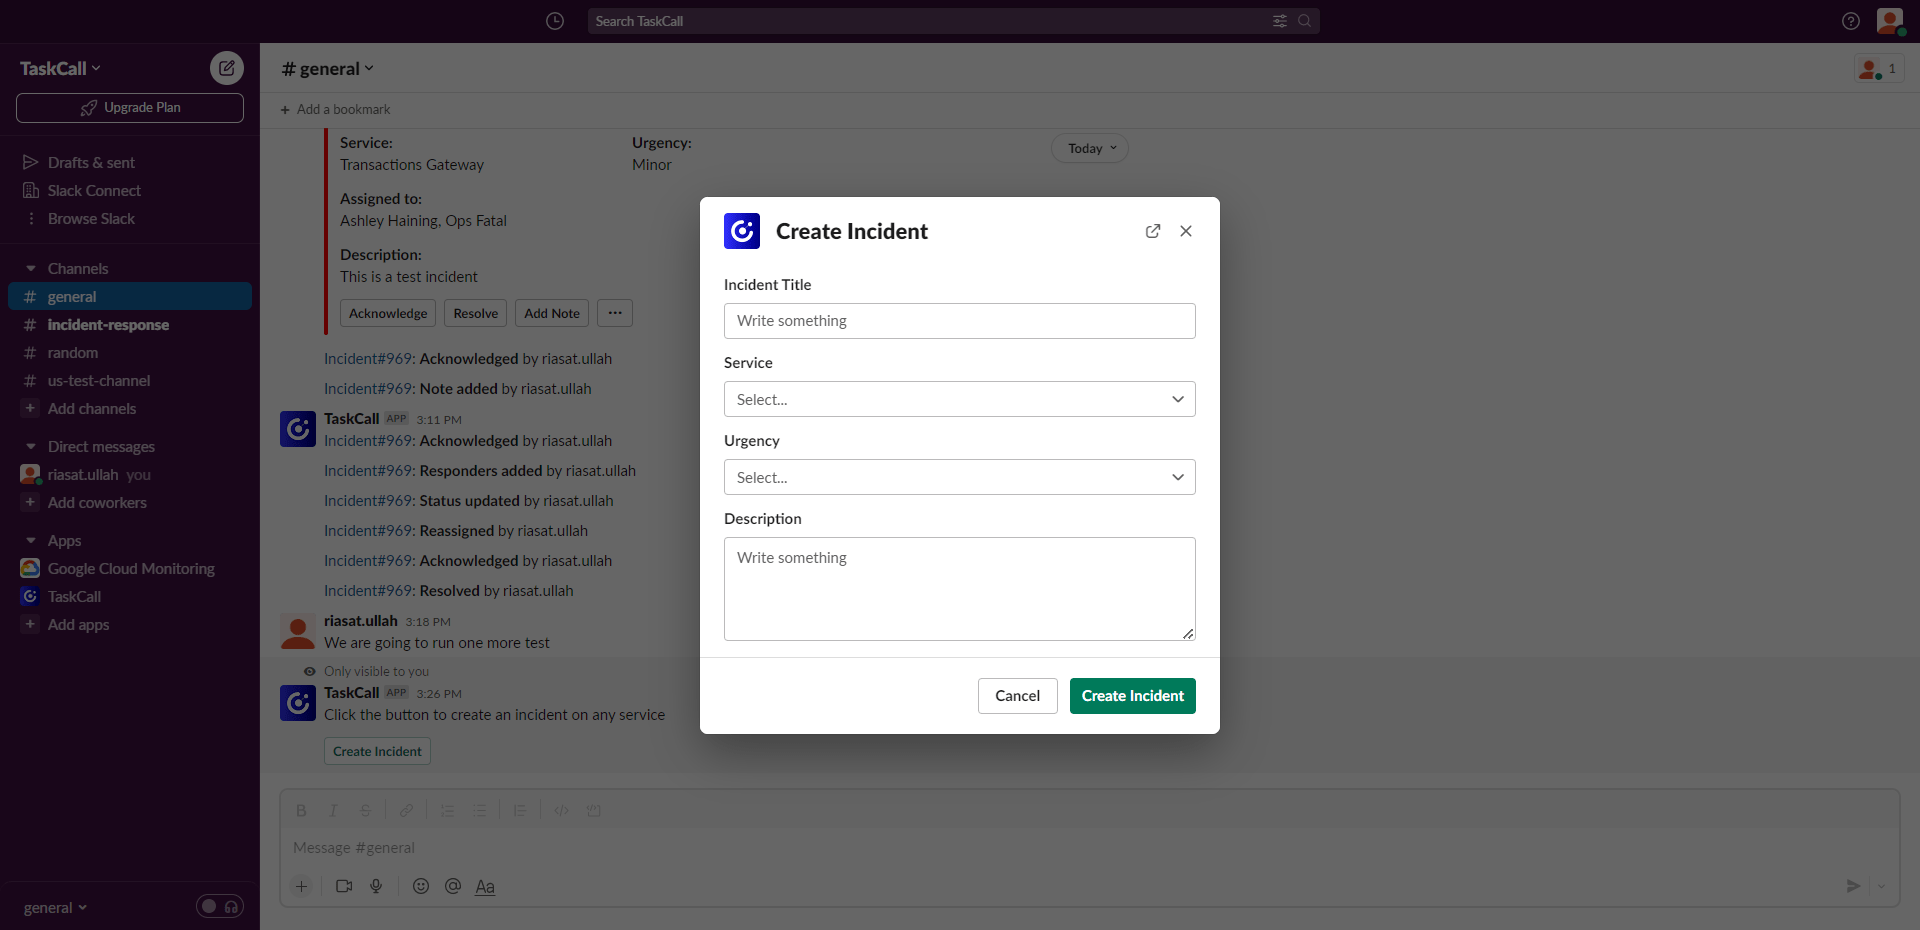 Modal to create incidents from Slack